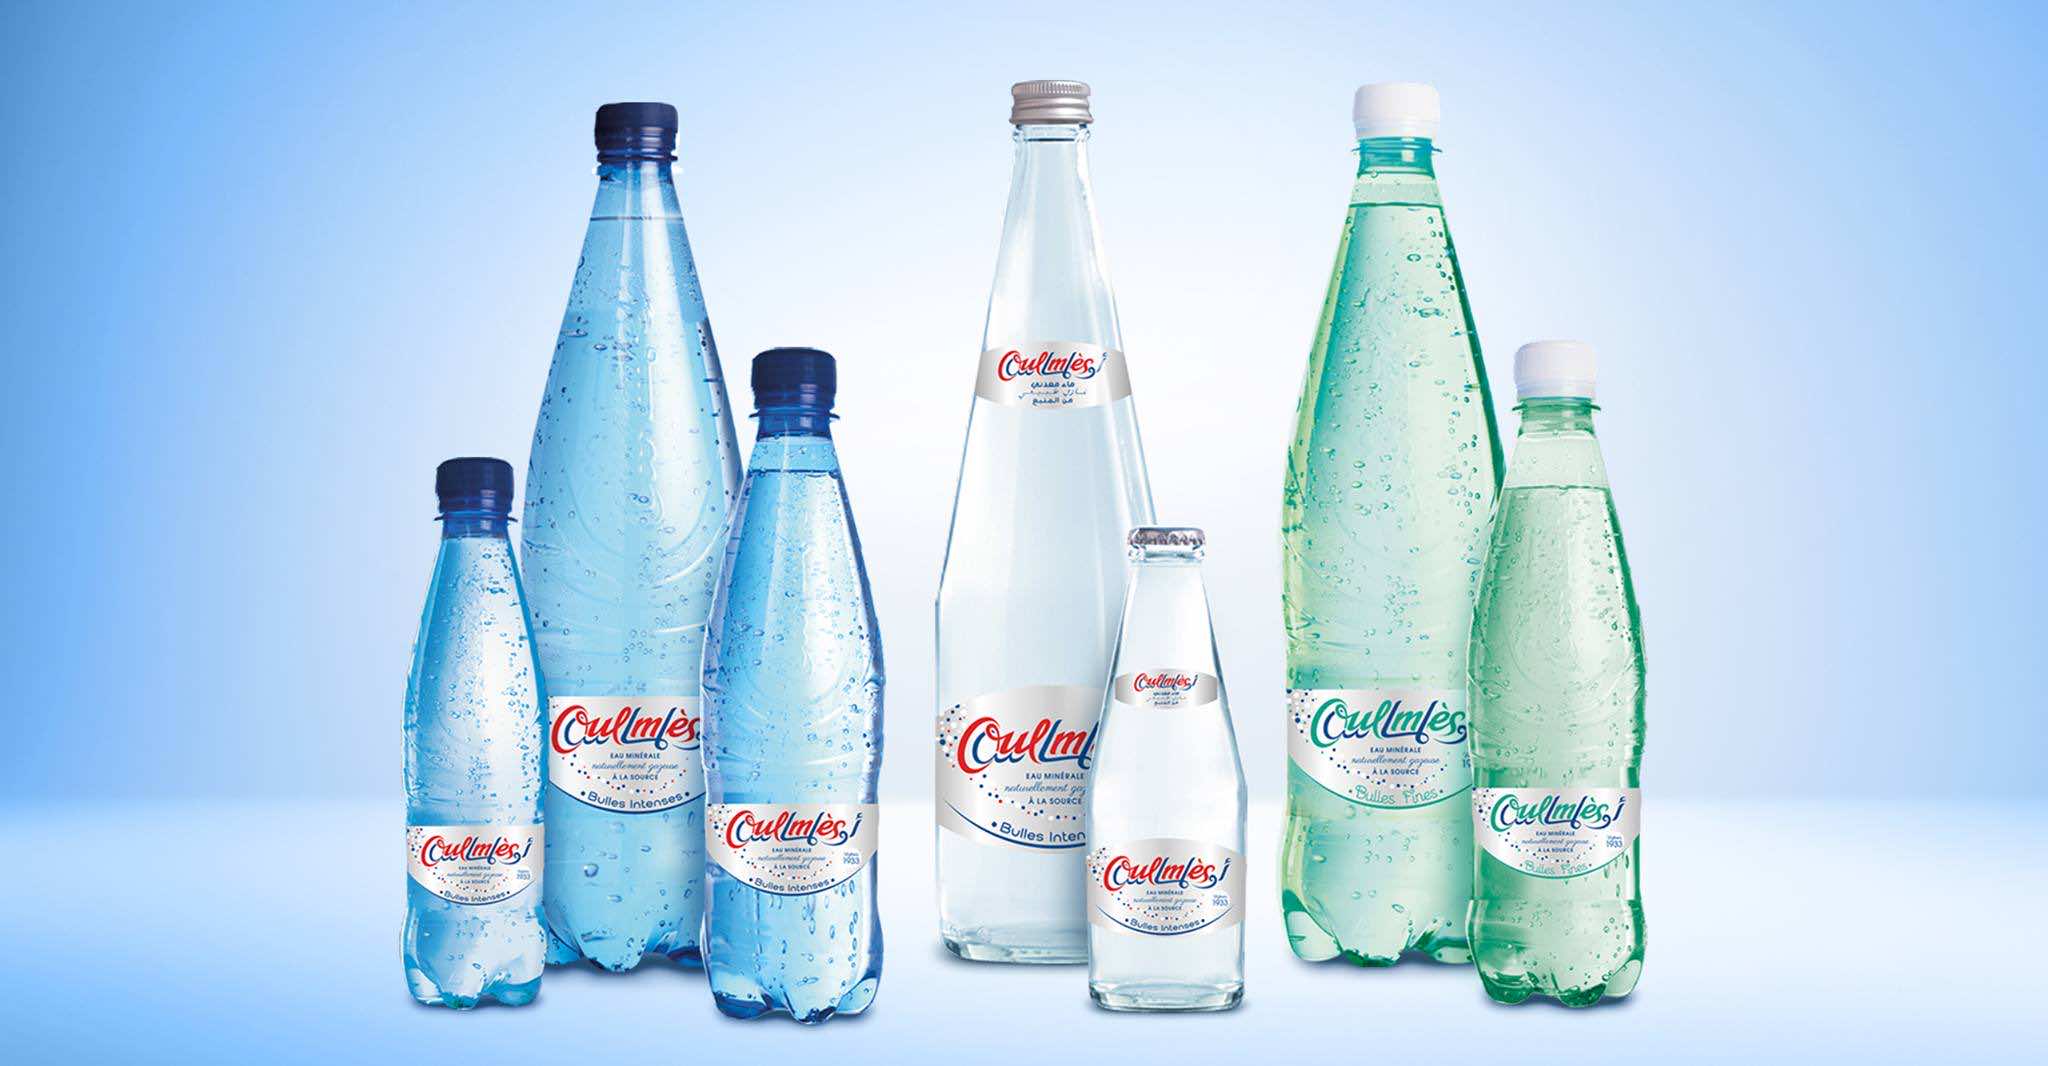 Beverages Company Oulmes to Expand Following Strong Earnings